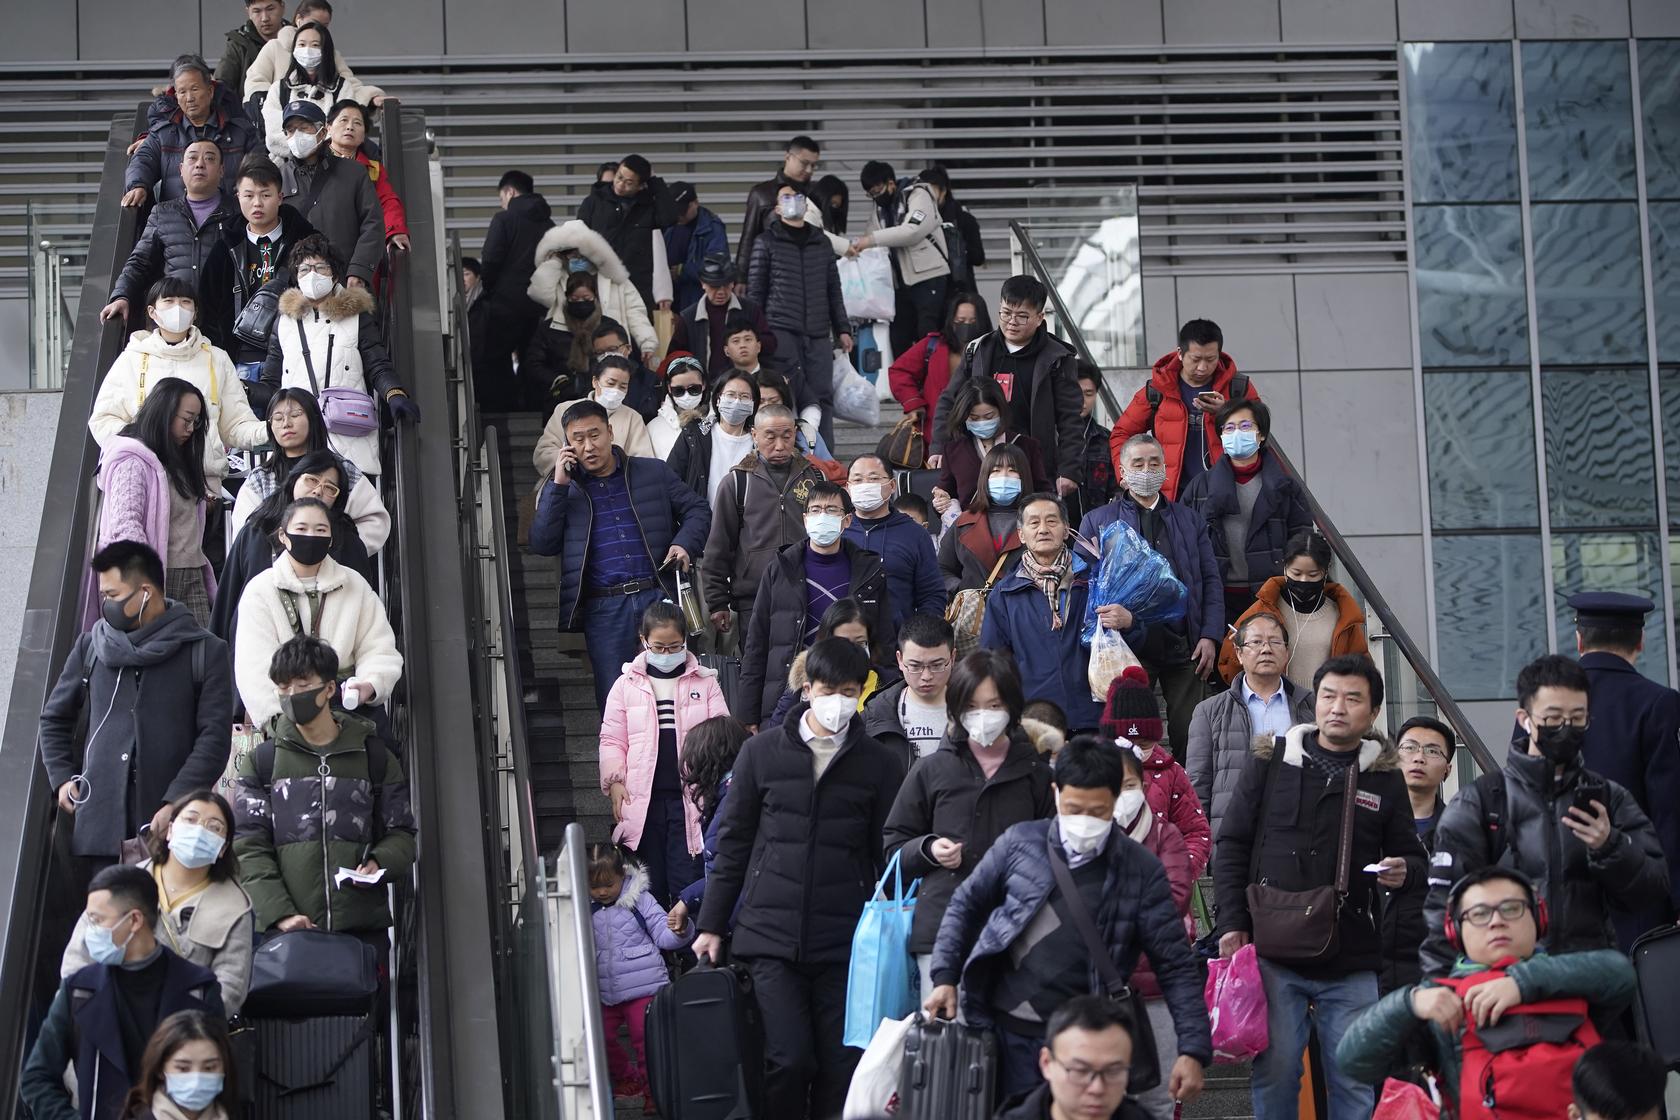 Passengers wearing masks are seen at Shanghai railway station in Shanghai, China January 21, 2020. REUTERS/Aly Song